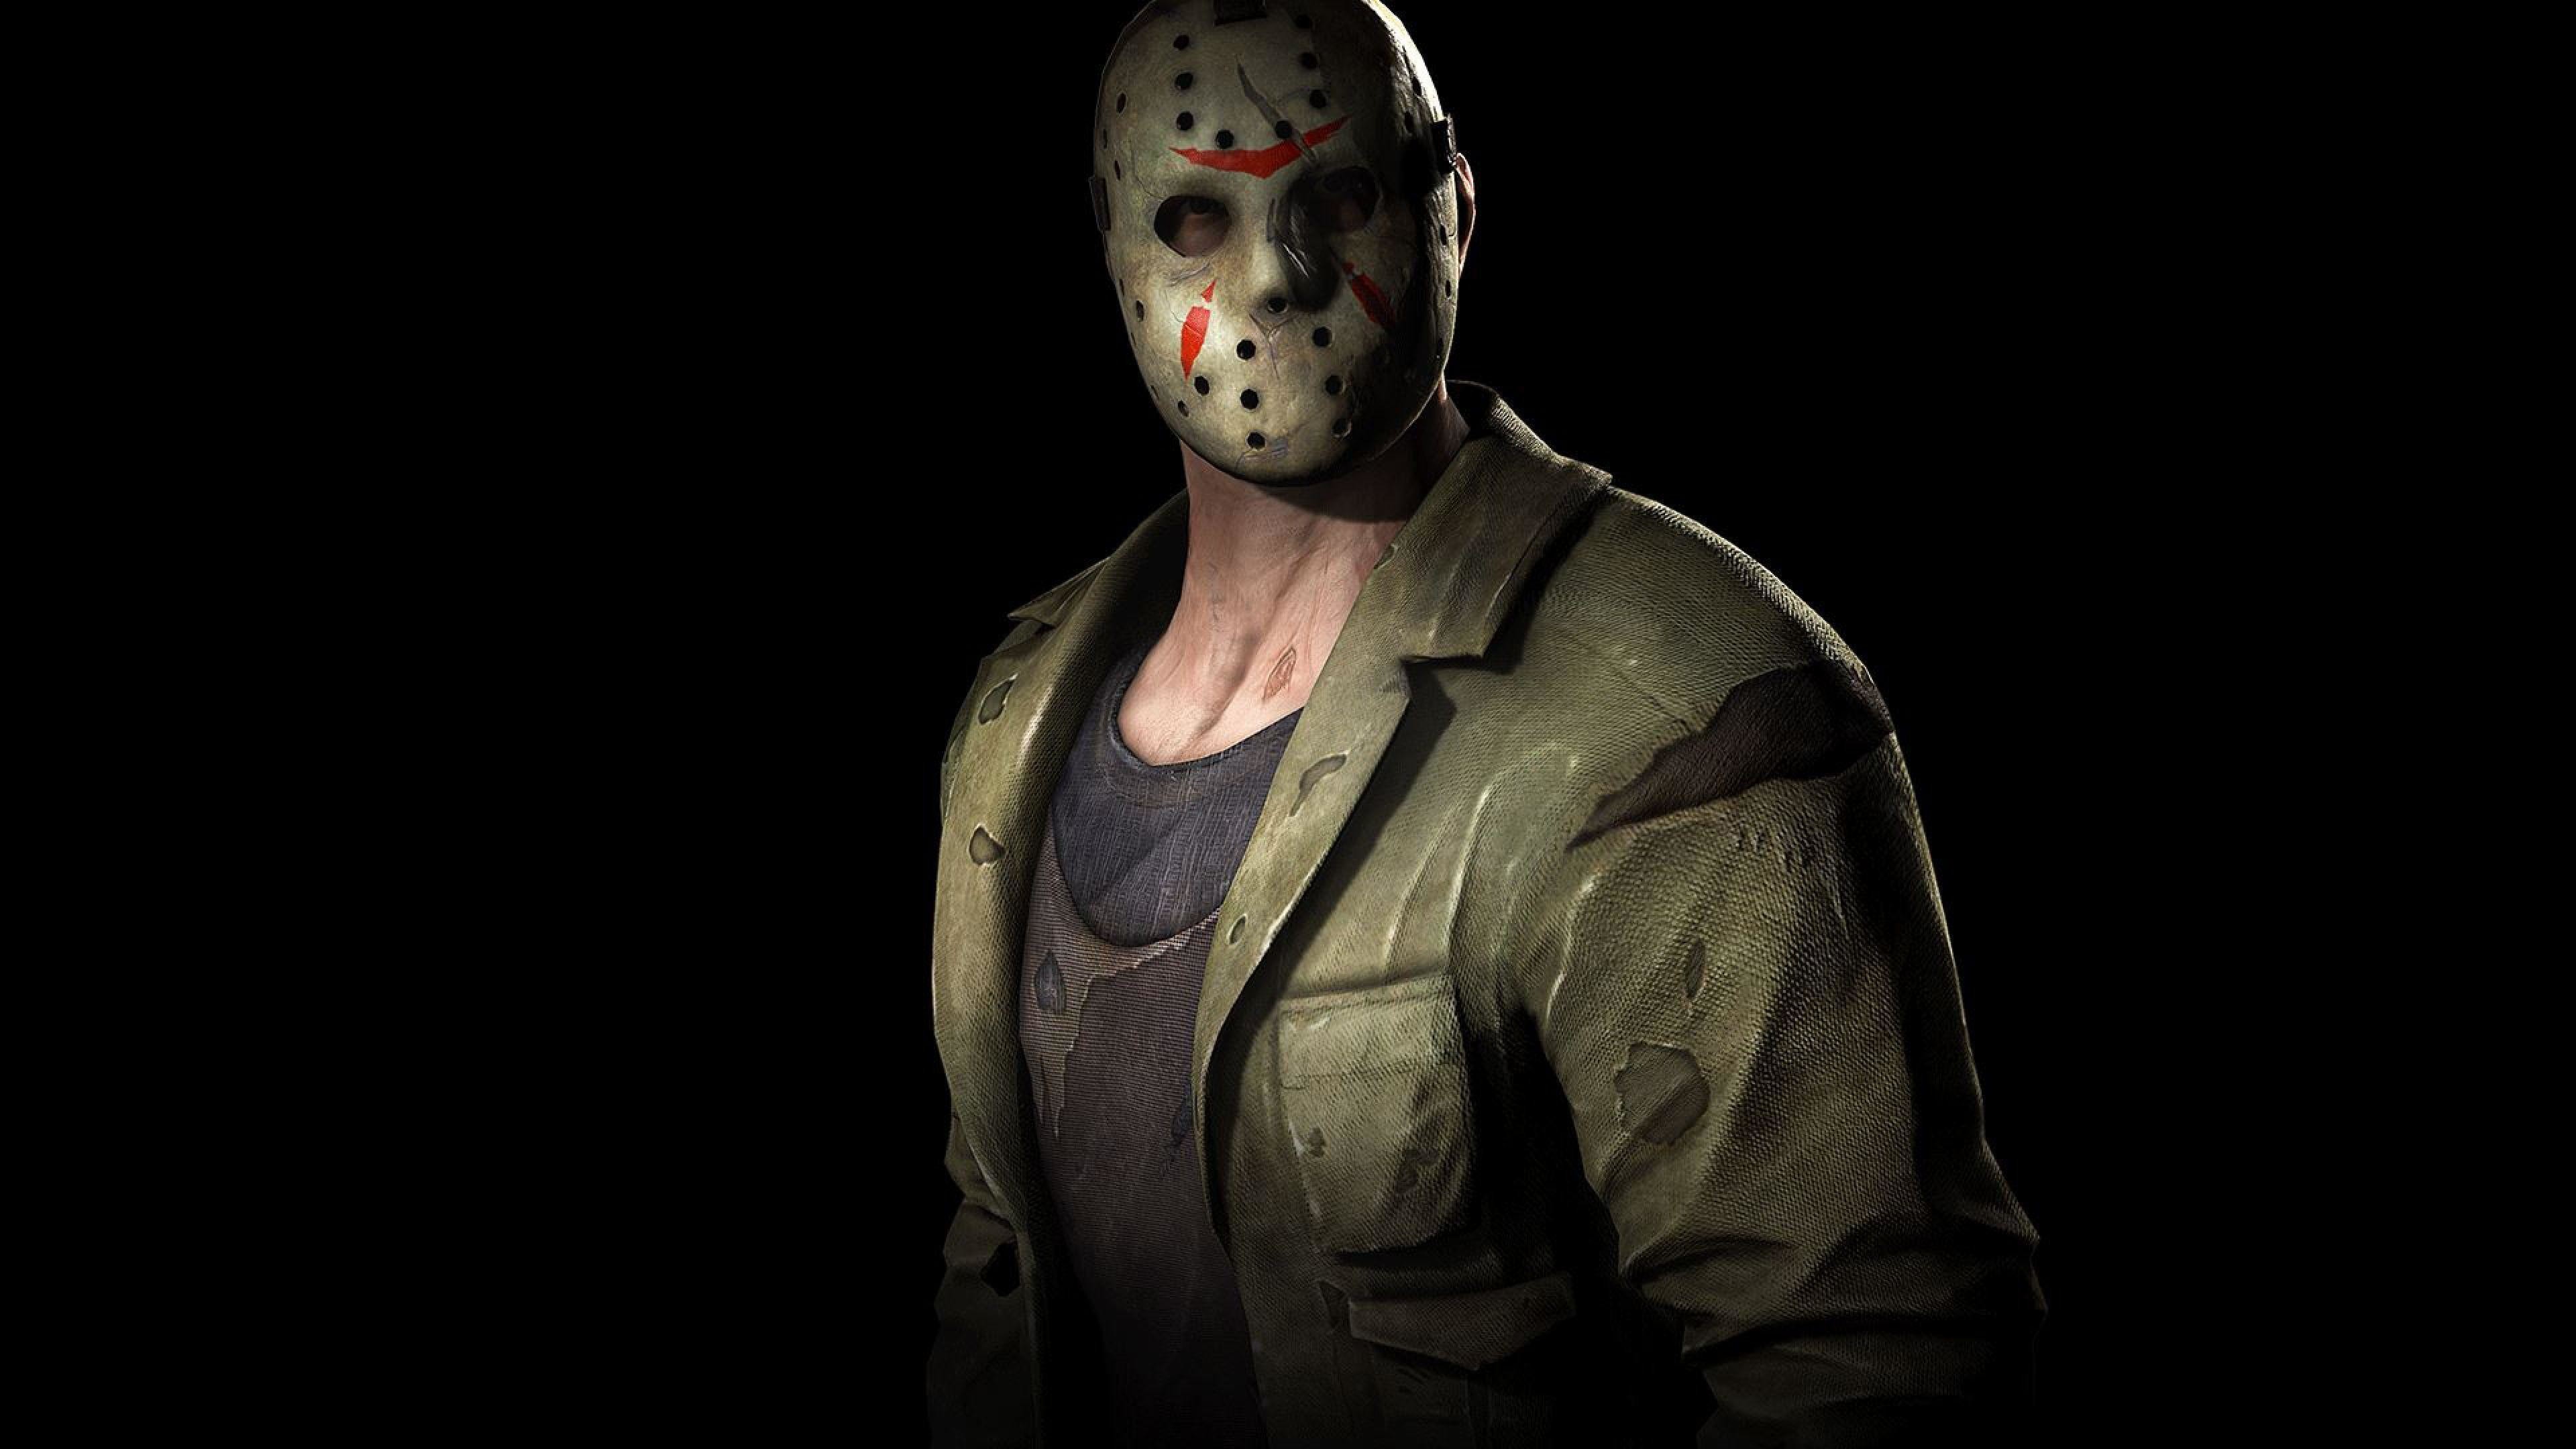 3840x2160 Download Wallpaper  Jason voorhees, Friday the 13th .